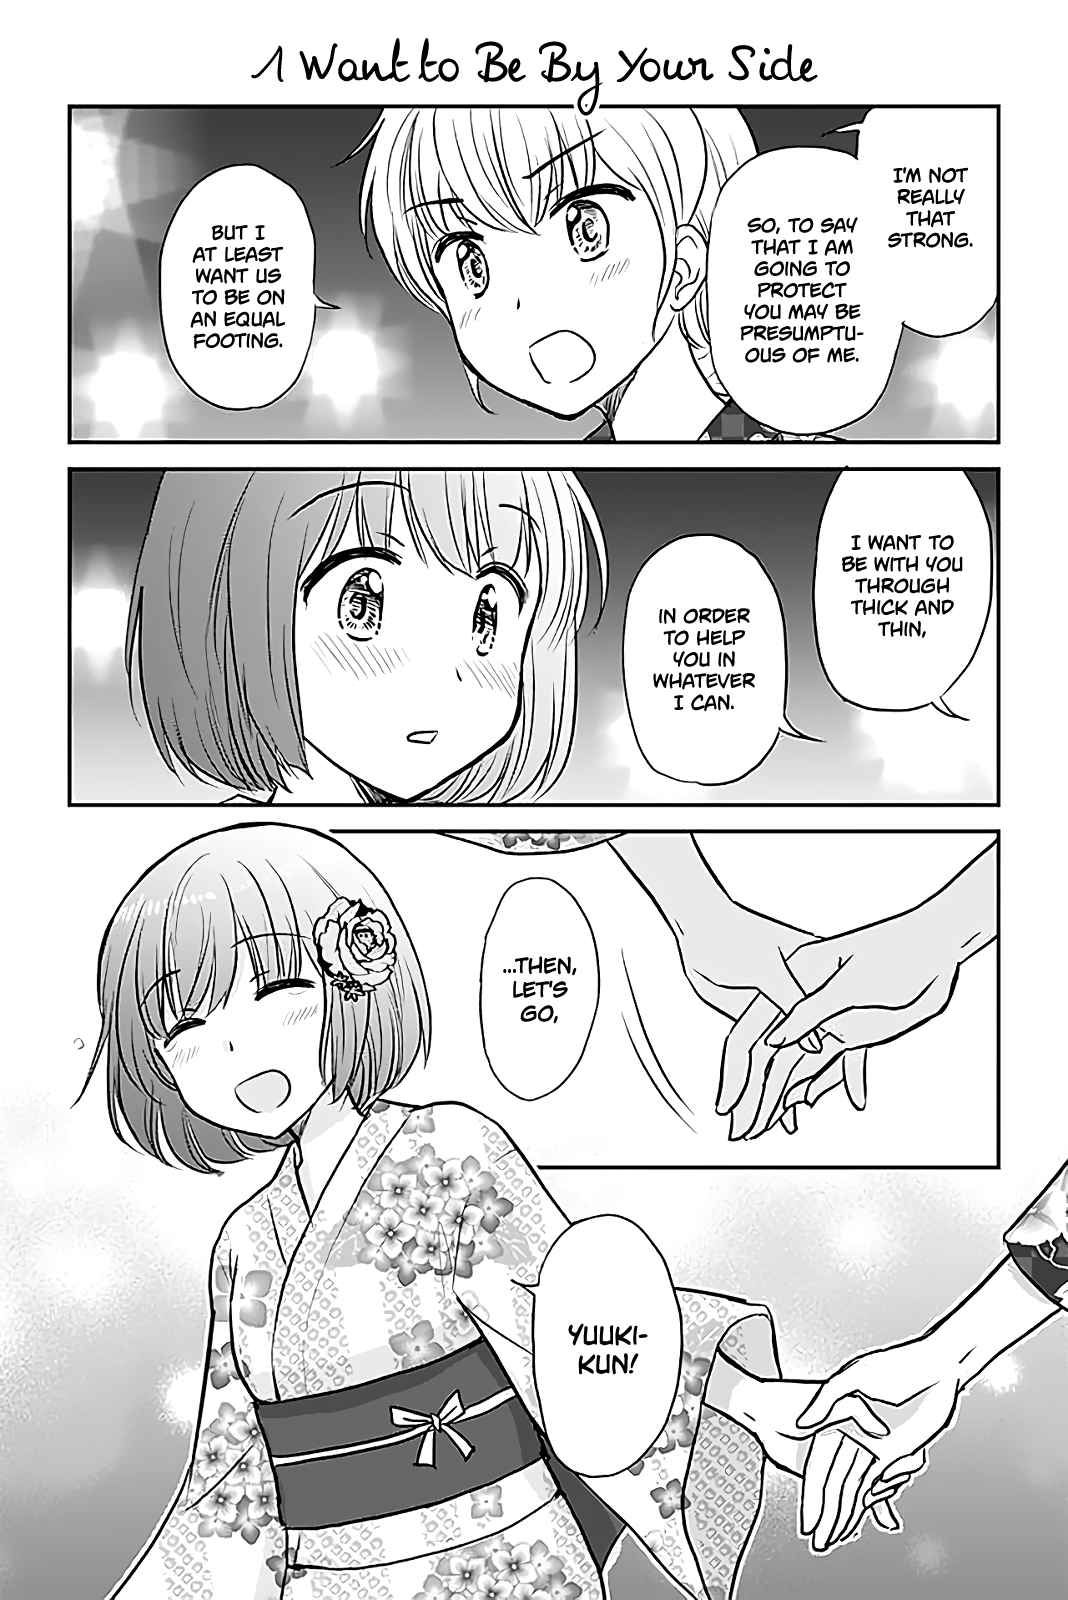 Otome Danshi ni Koisuru Otome Vol. 4 Ch. 480 I Want to Be By Your Side